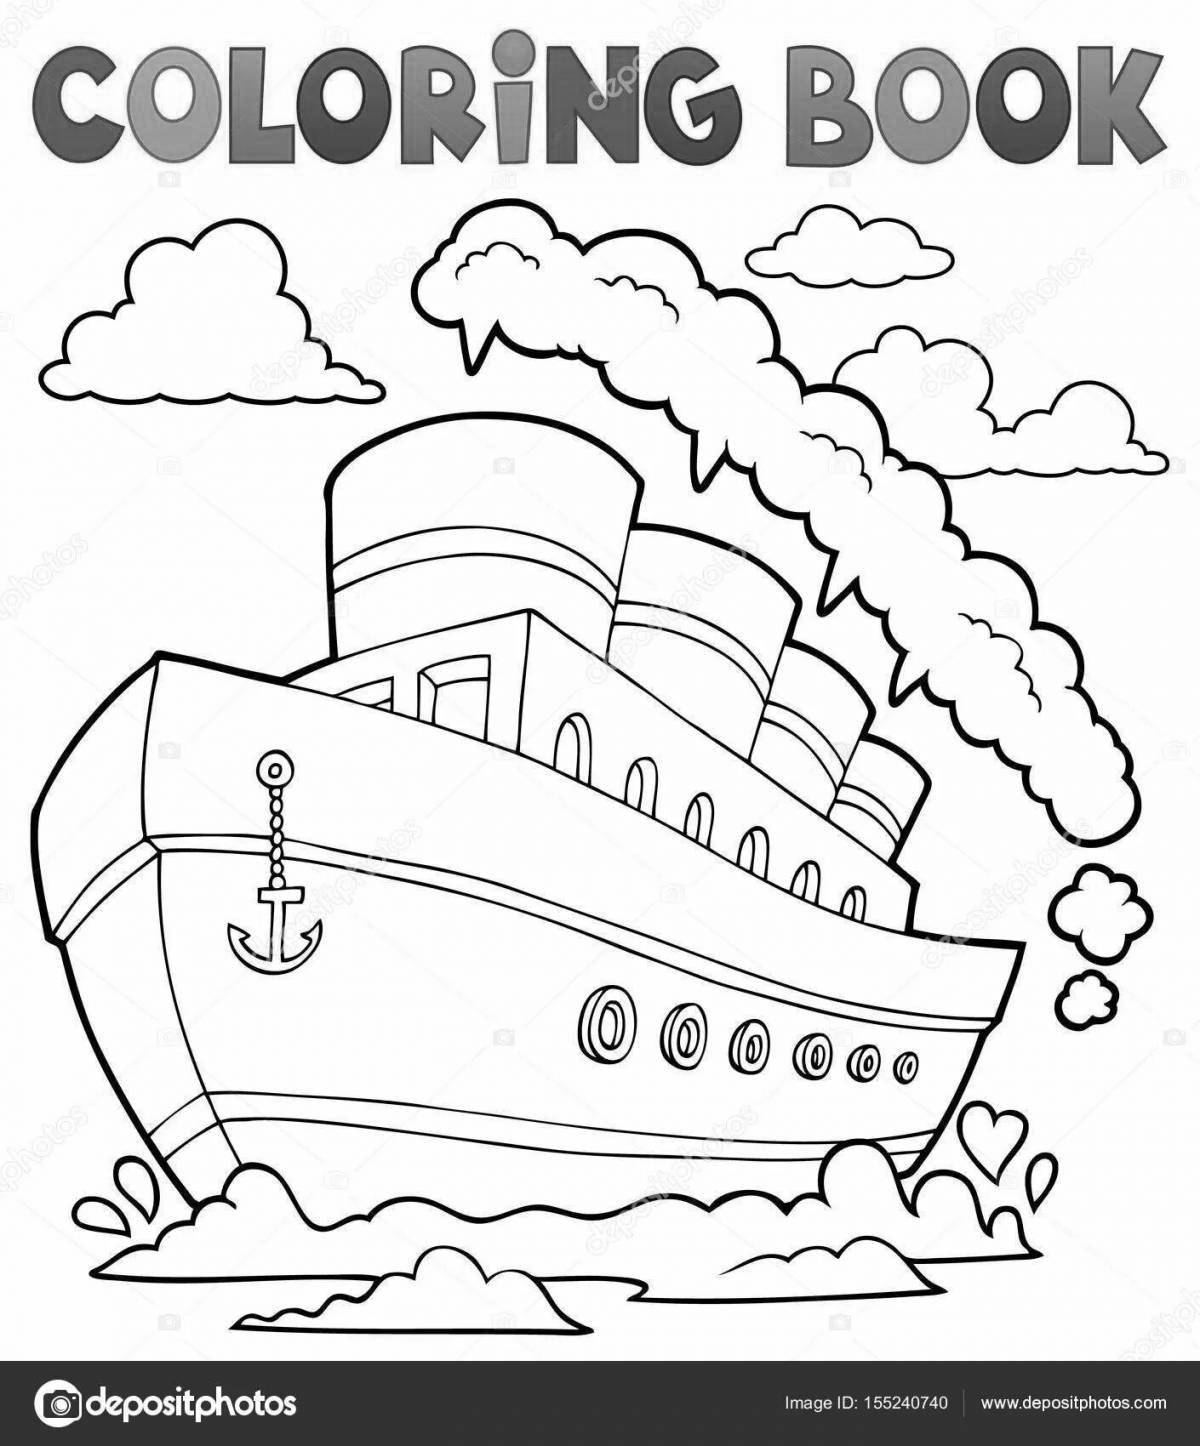 Fun coloring book for kids 5-6 years old